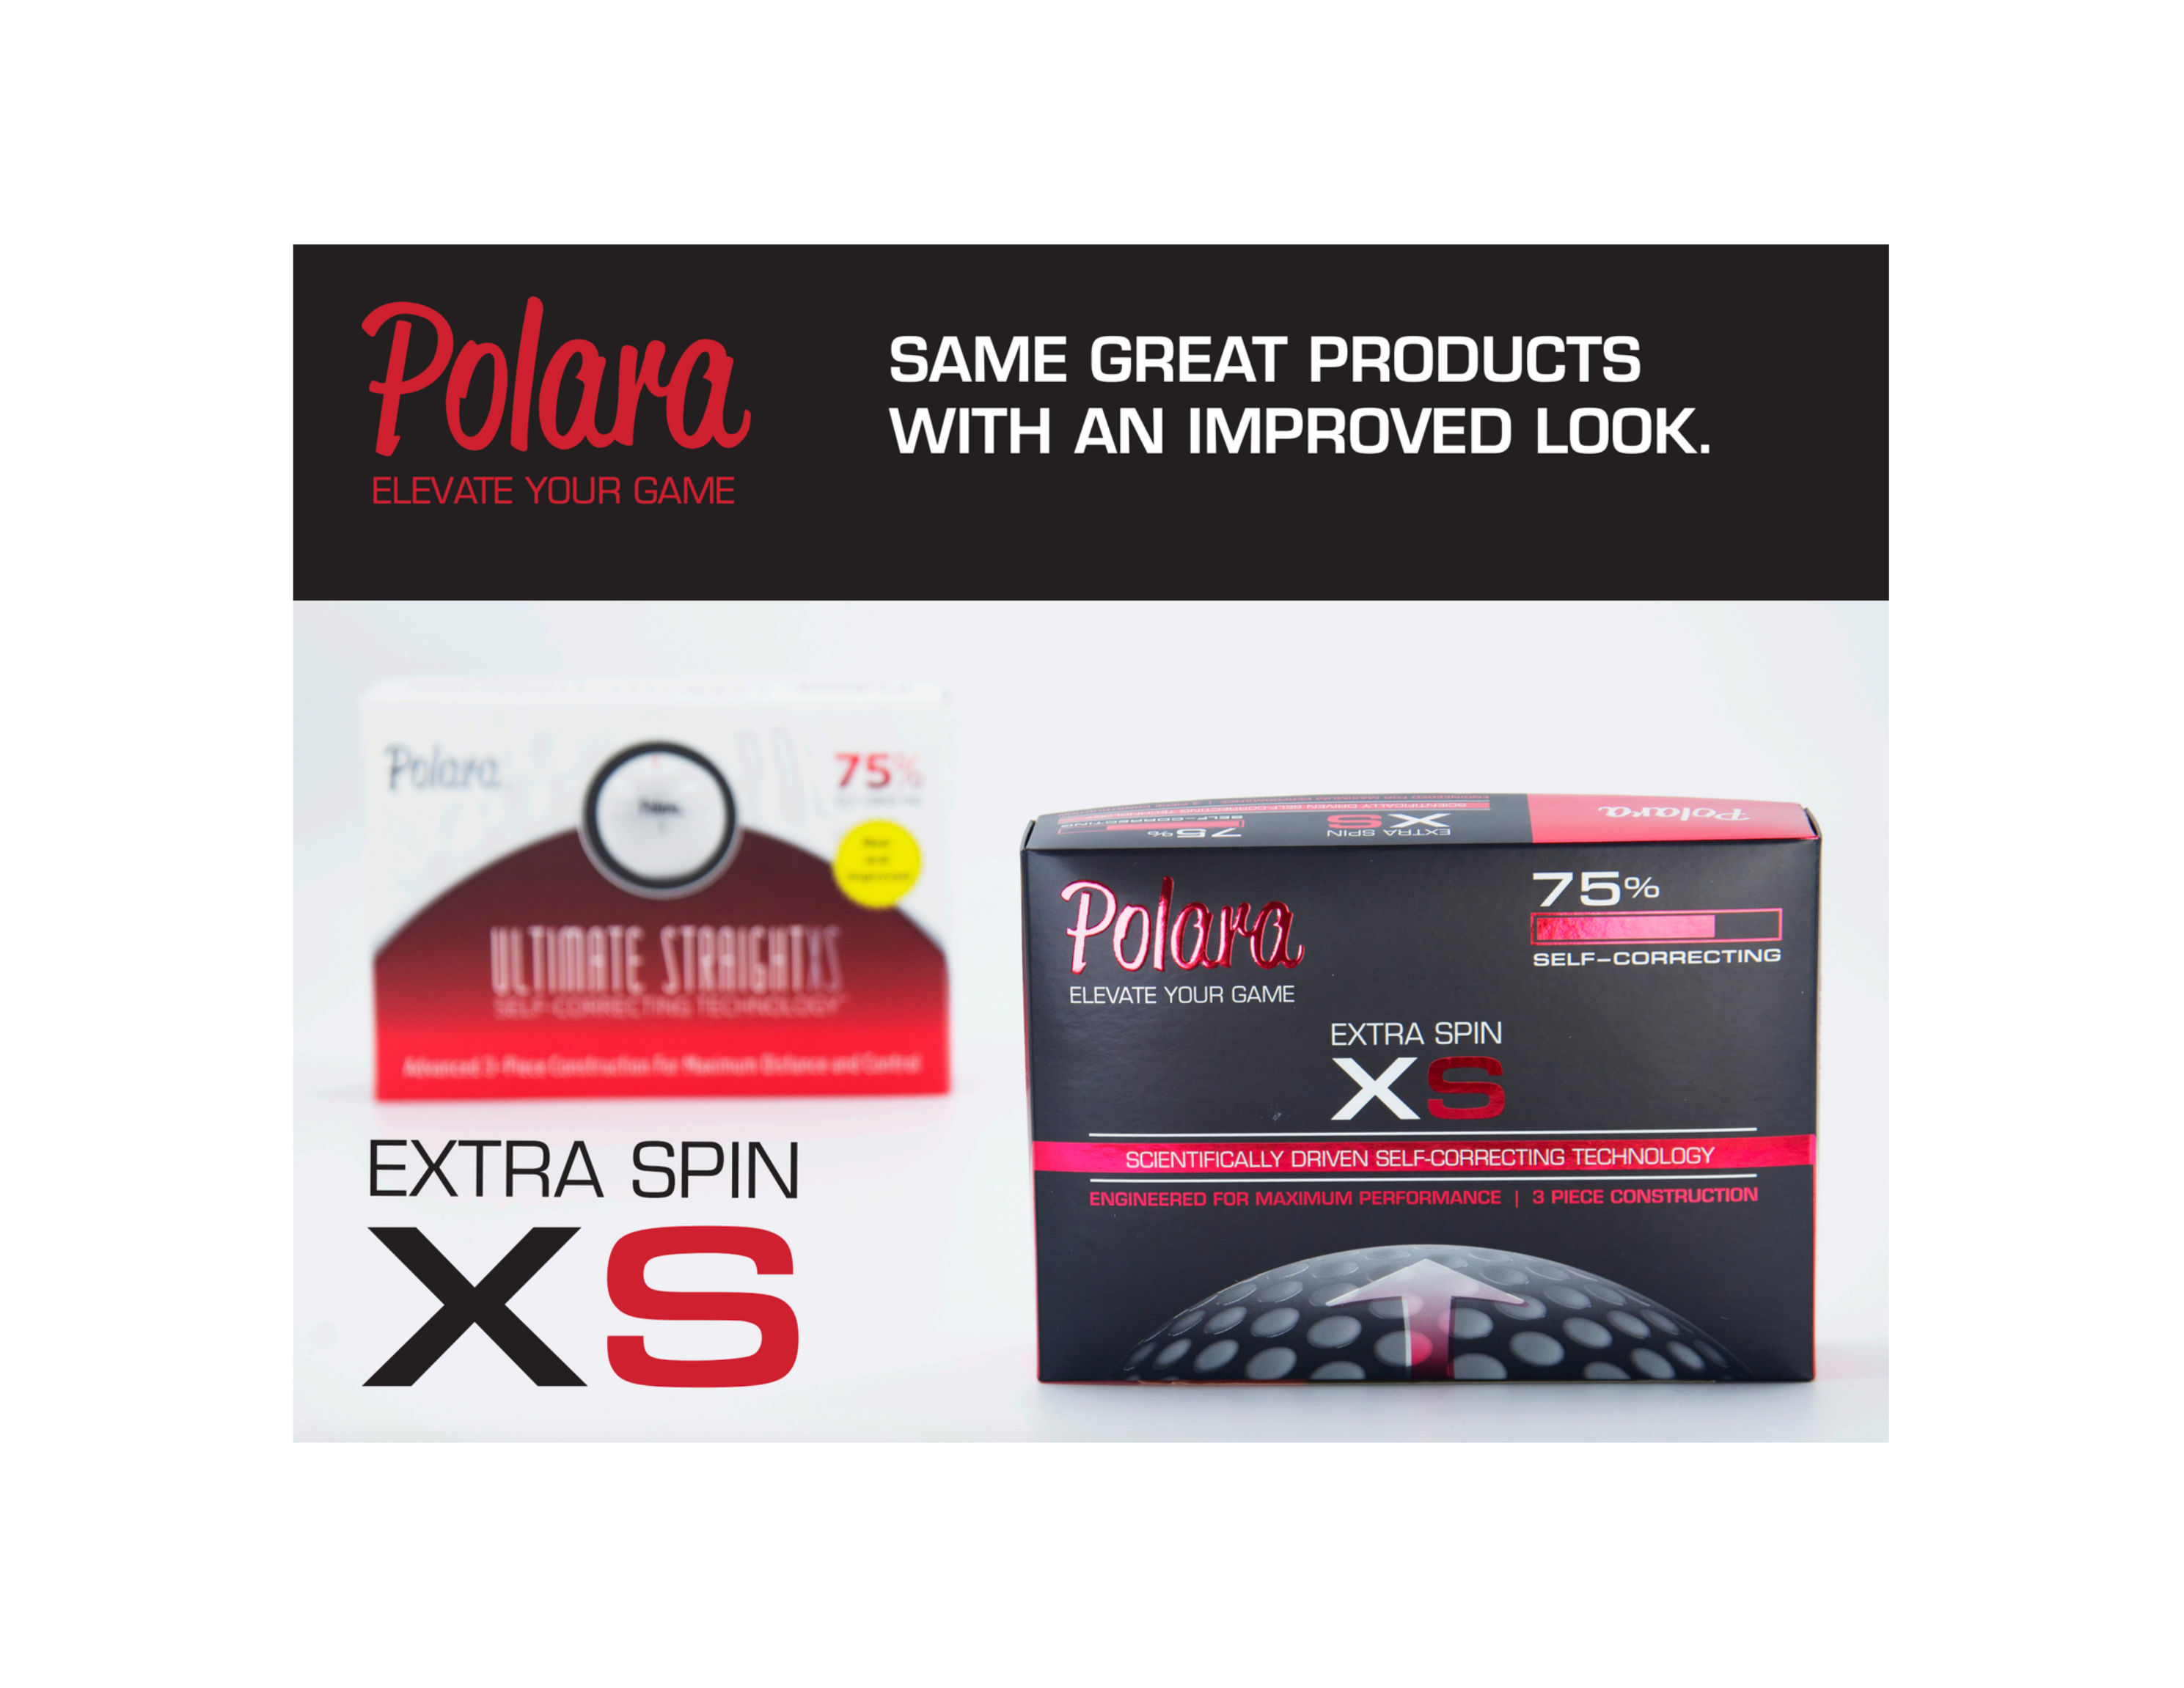 ULTIMATE STRAIGHT EXTRA SPIN XS - ONE DOZEN GOLF BALLS